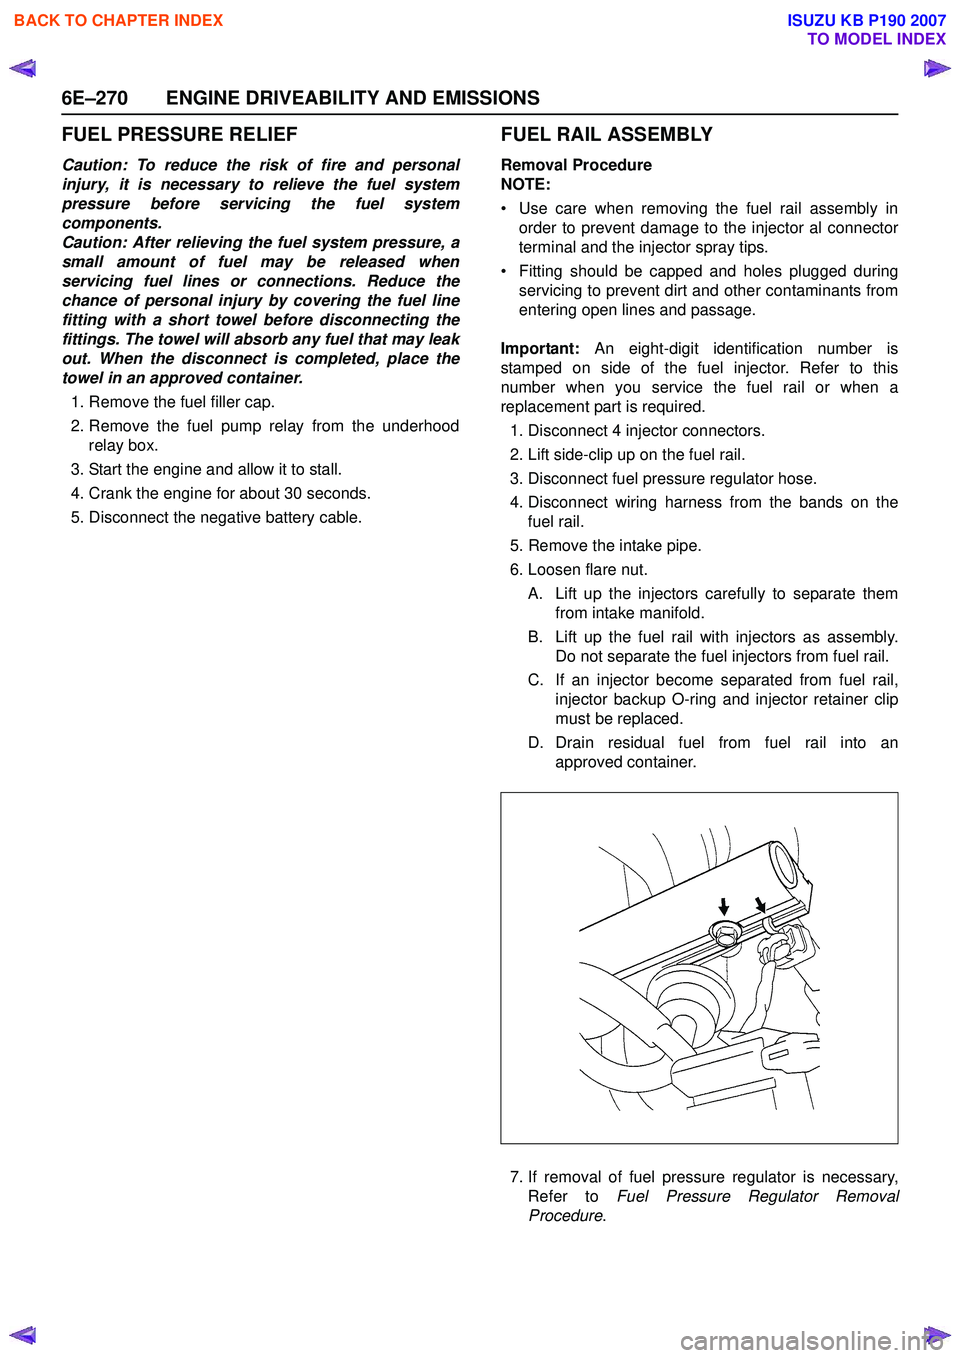 ISUZU KB P190 2007  Workshop Repair Manual 6E–270 ENGINE DRIVEABILITY AND EMISSIONS
FUEL PRESSURE RELIEF
Caution: To reduce the risk of fire and personal 
injury, it is necessary to relieve the fuel system
pressure before servicing the fuel 